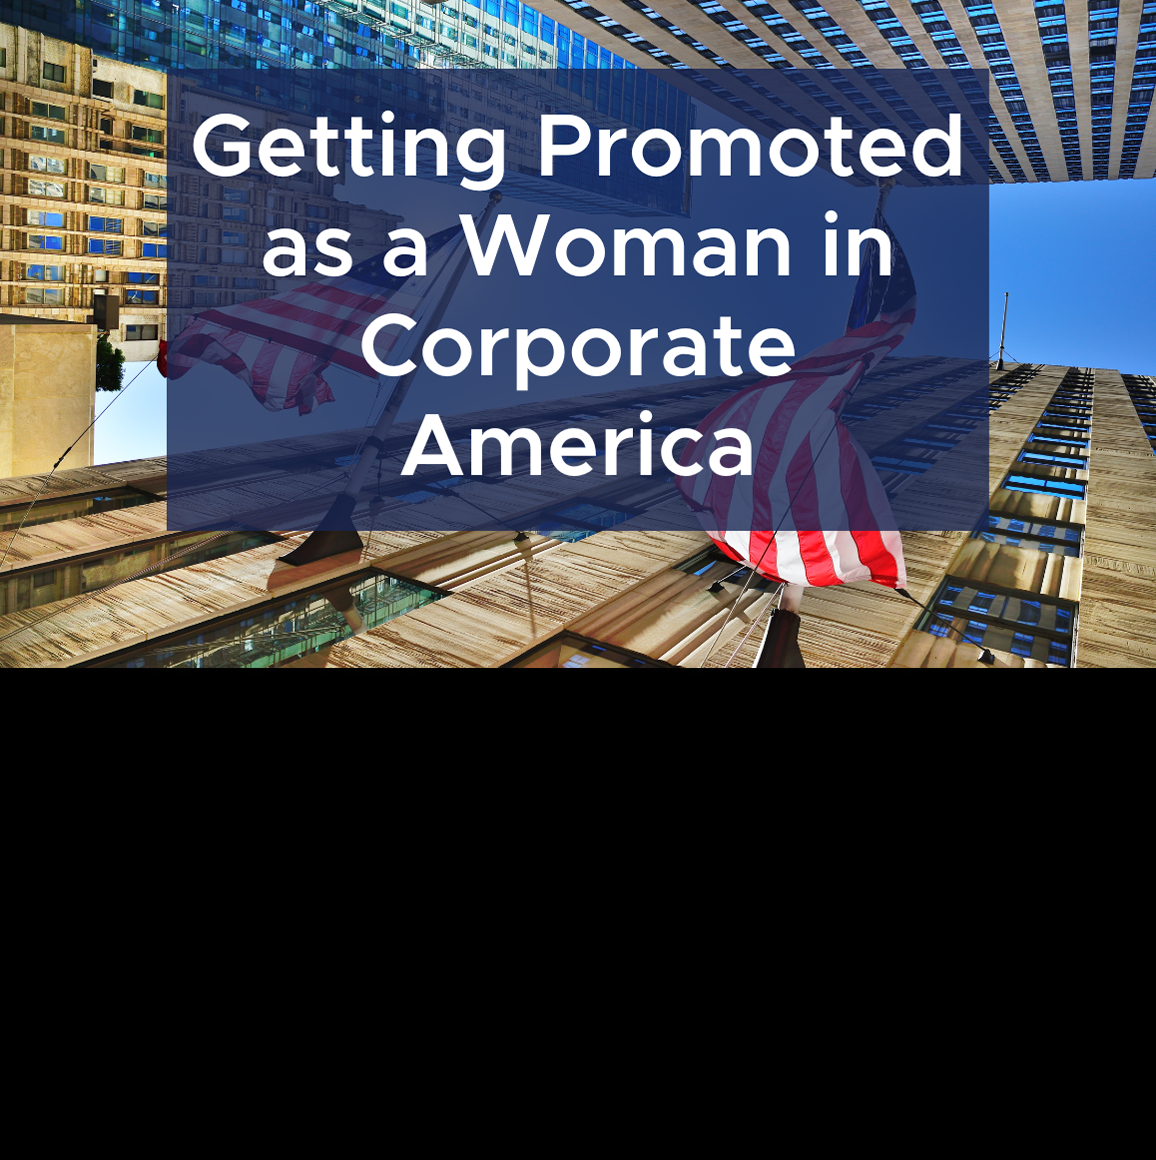 Getting Promoted as a Woman in Corporate America